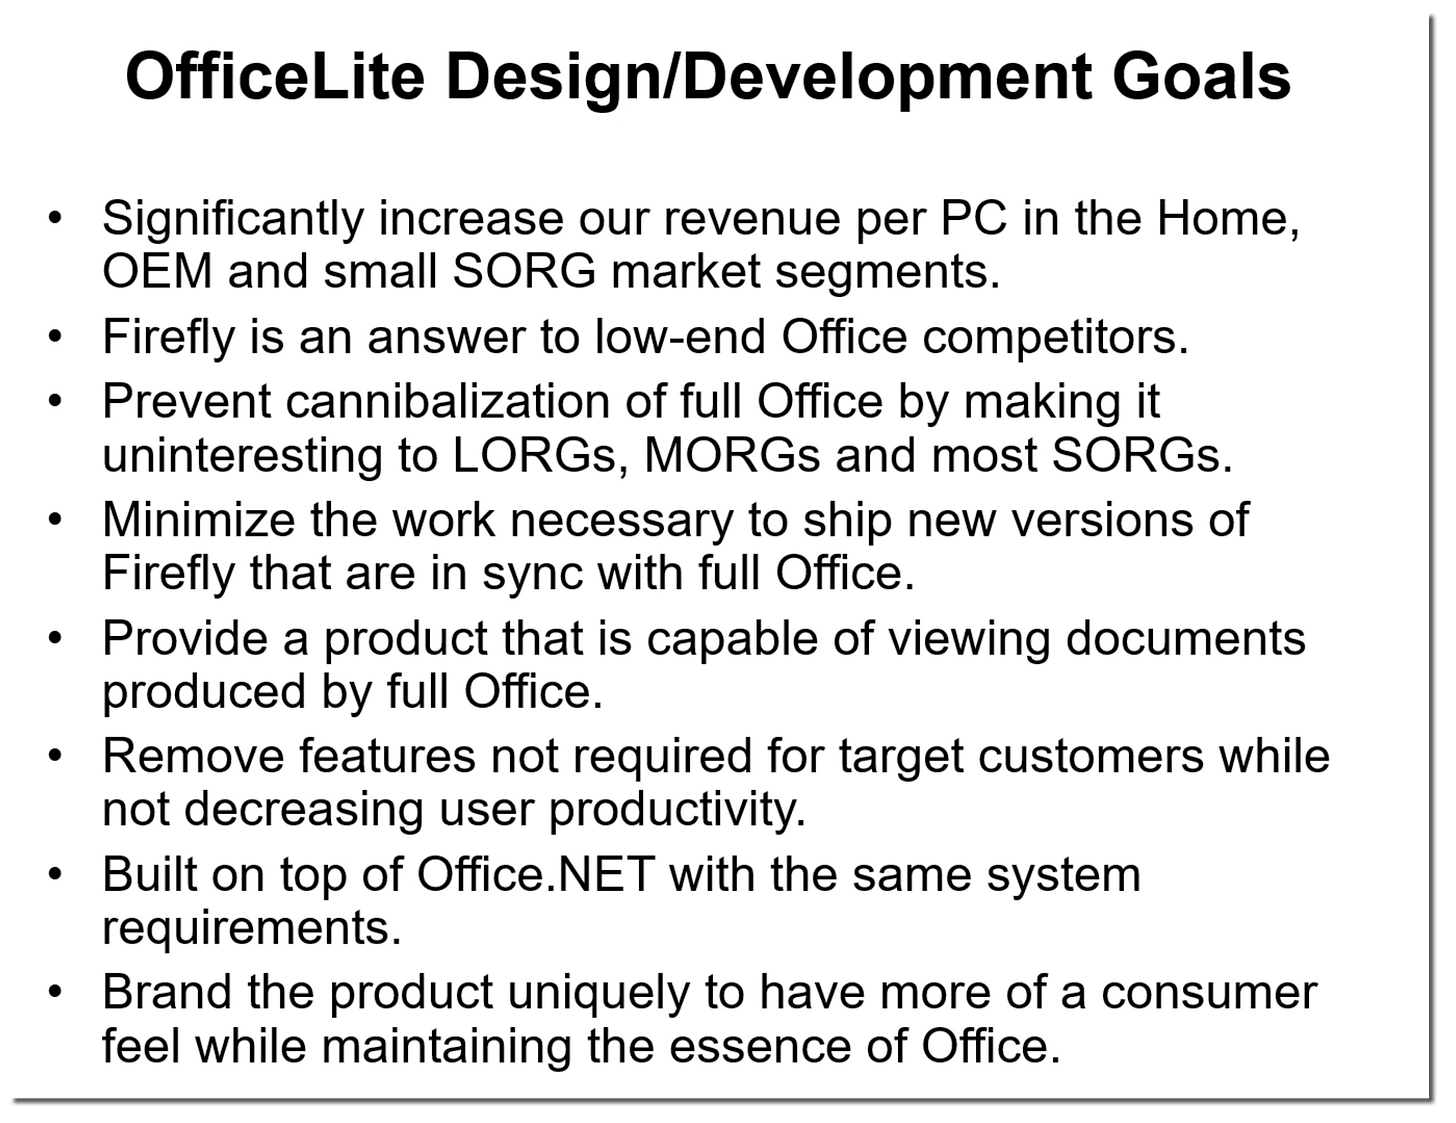 OfficeLite Design/Development Goals Significantly increase our revenue per PC in the Home, OEM and small SORG market segments. Firefly is an answer to low-end Office competitors. Prevent cannibalization of full Office by making it uninteresting to LOGs, MORGs and most SORGs. Minimize the work necessary to ship new versions of Firefly that are in sync with full Office. Provide a product that is capable of viewing documents produced by full Office. Remove features not required for target customers while not decreasing user productivity. Built on top of Office.NET with the same system requirements. Brand the product uniquely to have more of a consumer feel while maintaining the essence of Office.